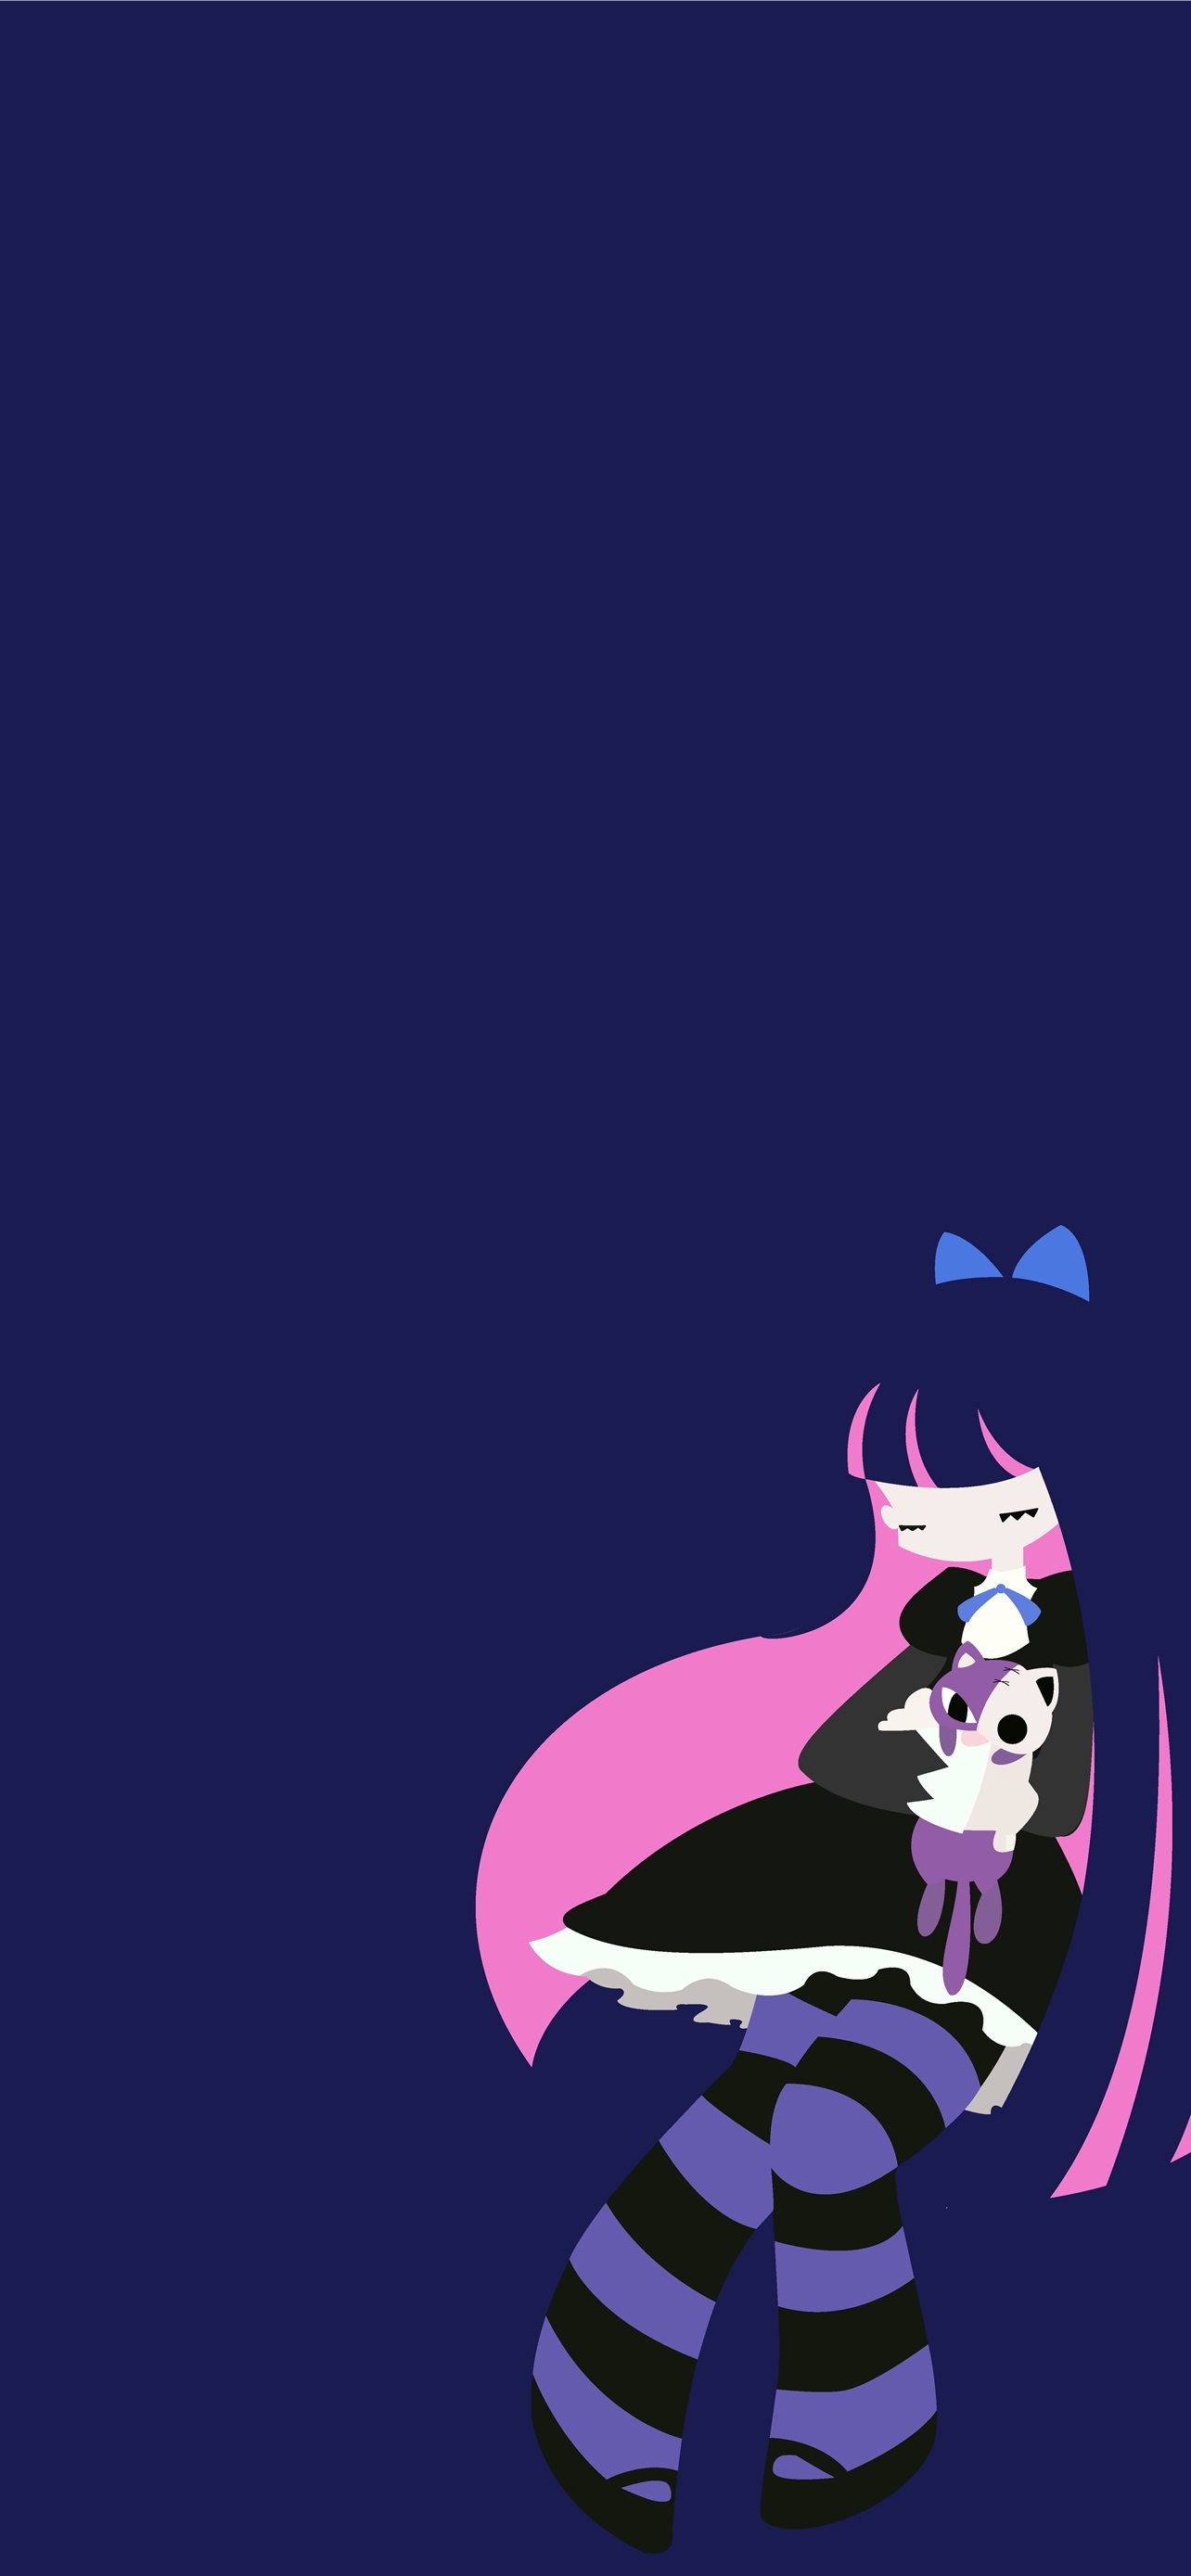 Stocking From Panty Stocking Album On Imgur Iphone Wallpapers Free Download 8877